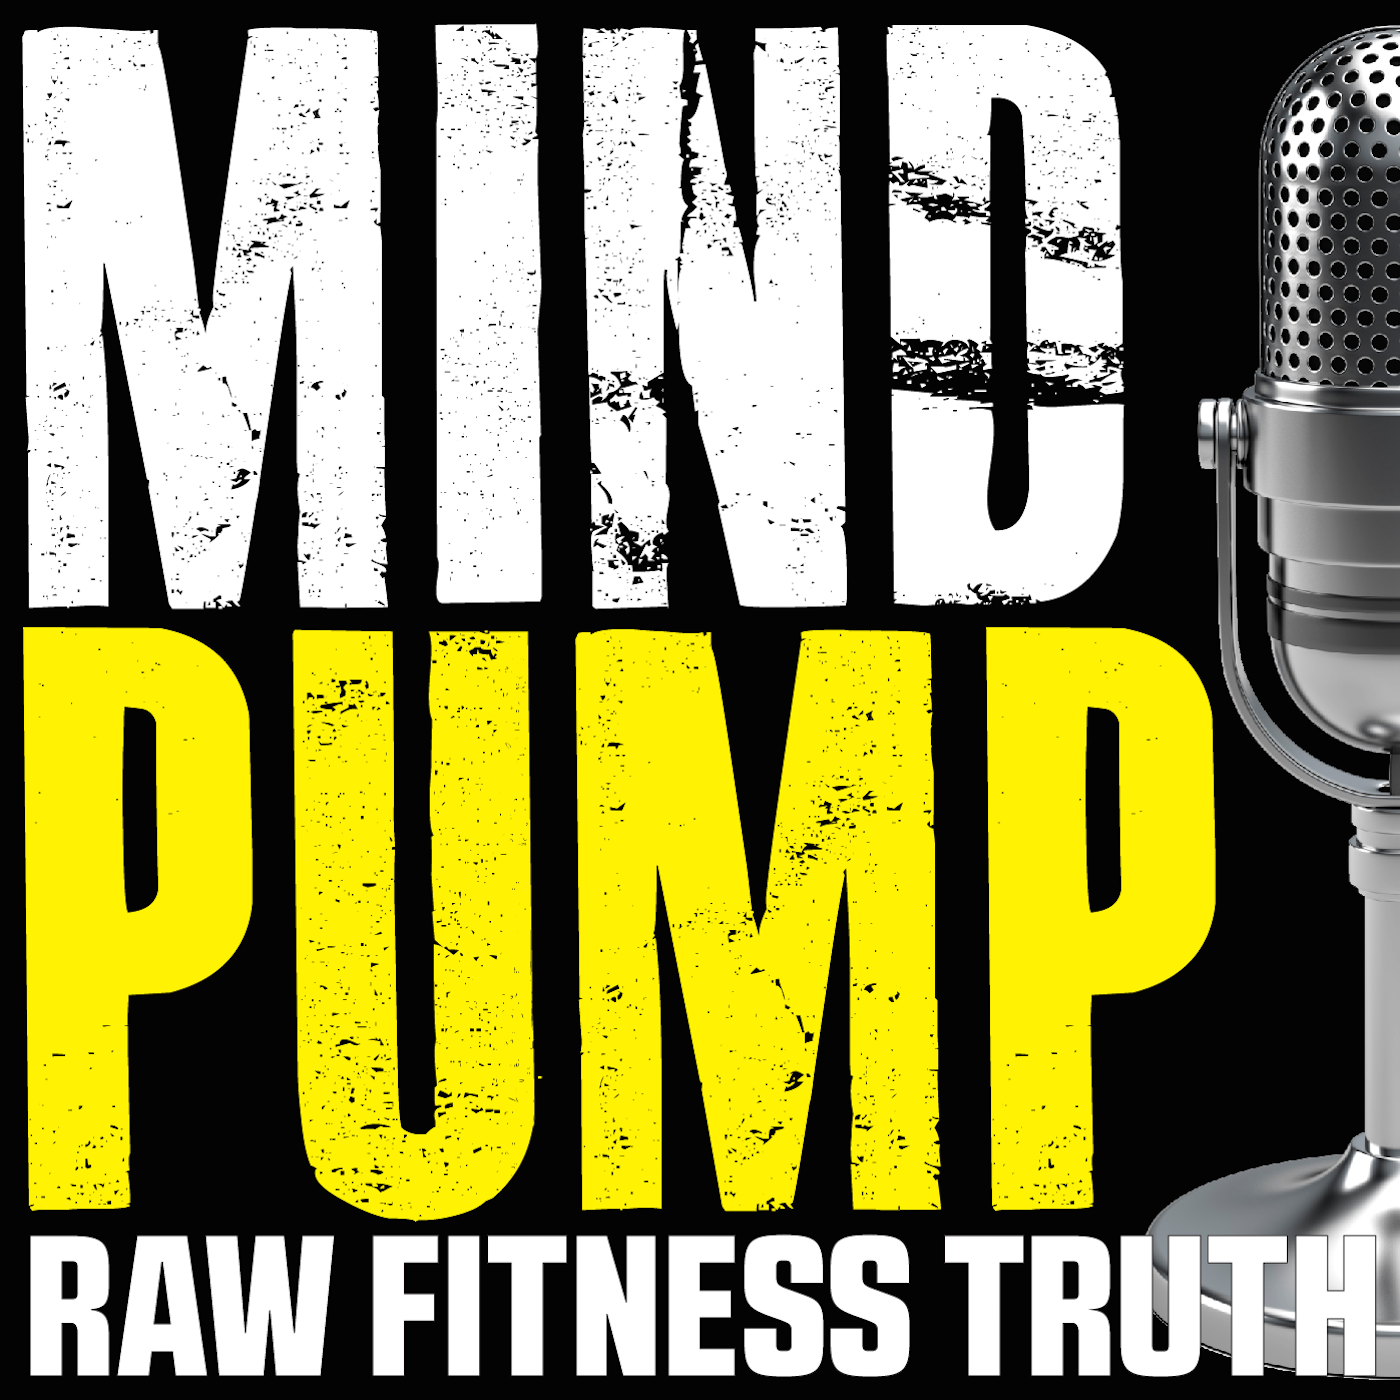 291: Sleep & Adaptation, Best Time For Cardio, Gender Specific Training & MORE